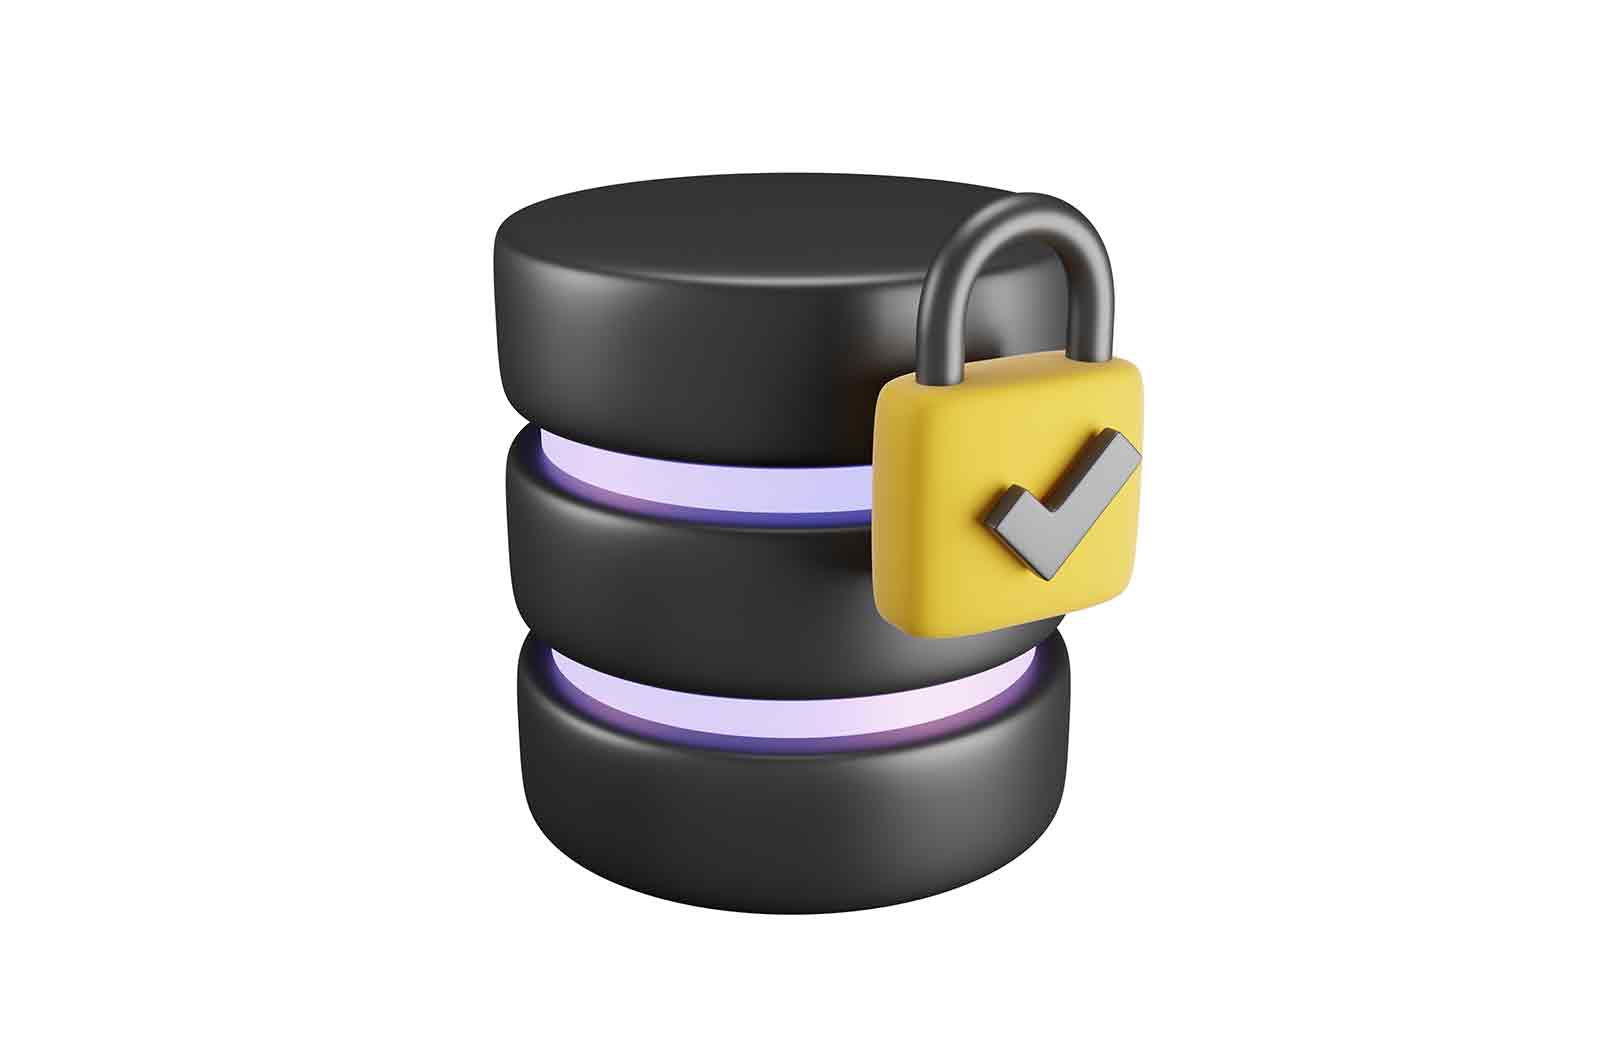 Server protection unit with closed padlock icon, database protection 3d rendered illustration. Internet security, cyber safety and data privacy.